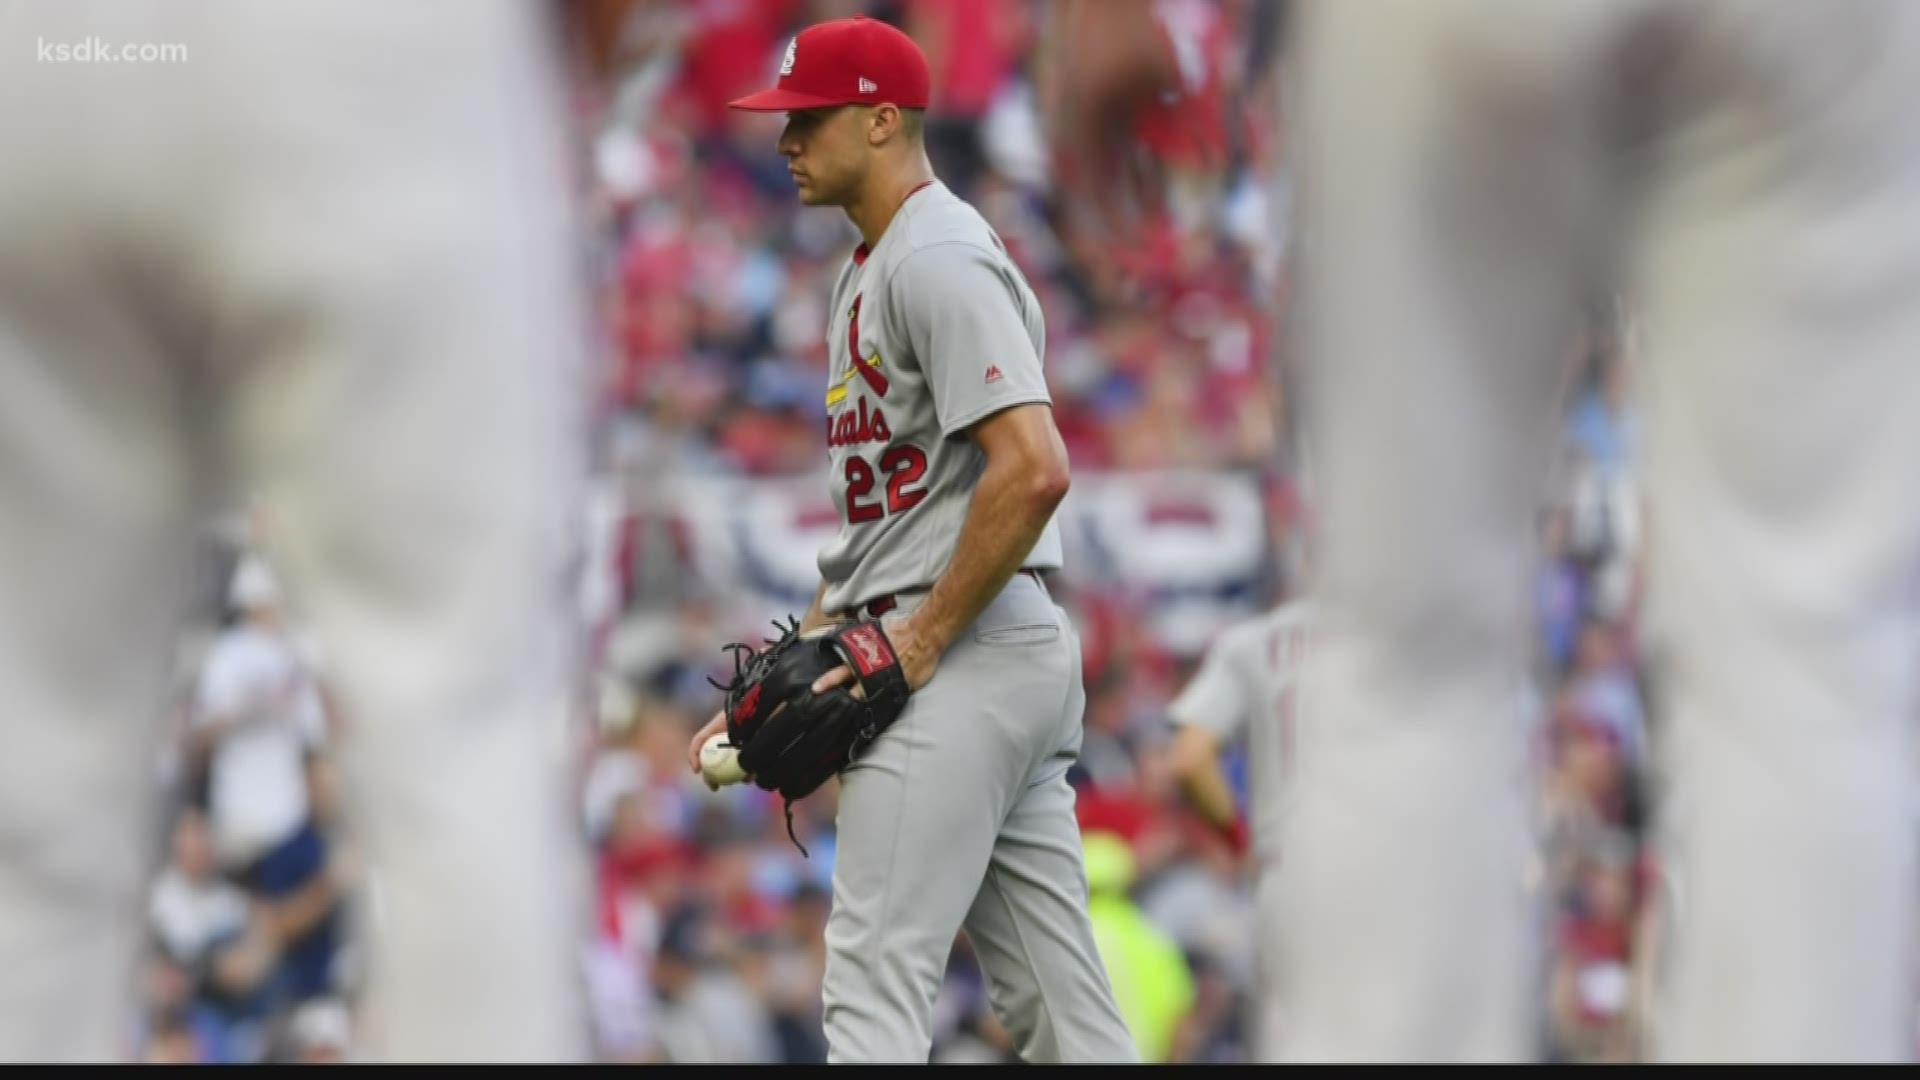 As the Cardinals are head for a winner-take-all Game 5, Andy Van Slyke broke down how he handled the big moment and who the Cardinals need to deliver on Wednesday.